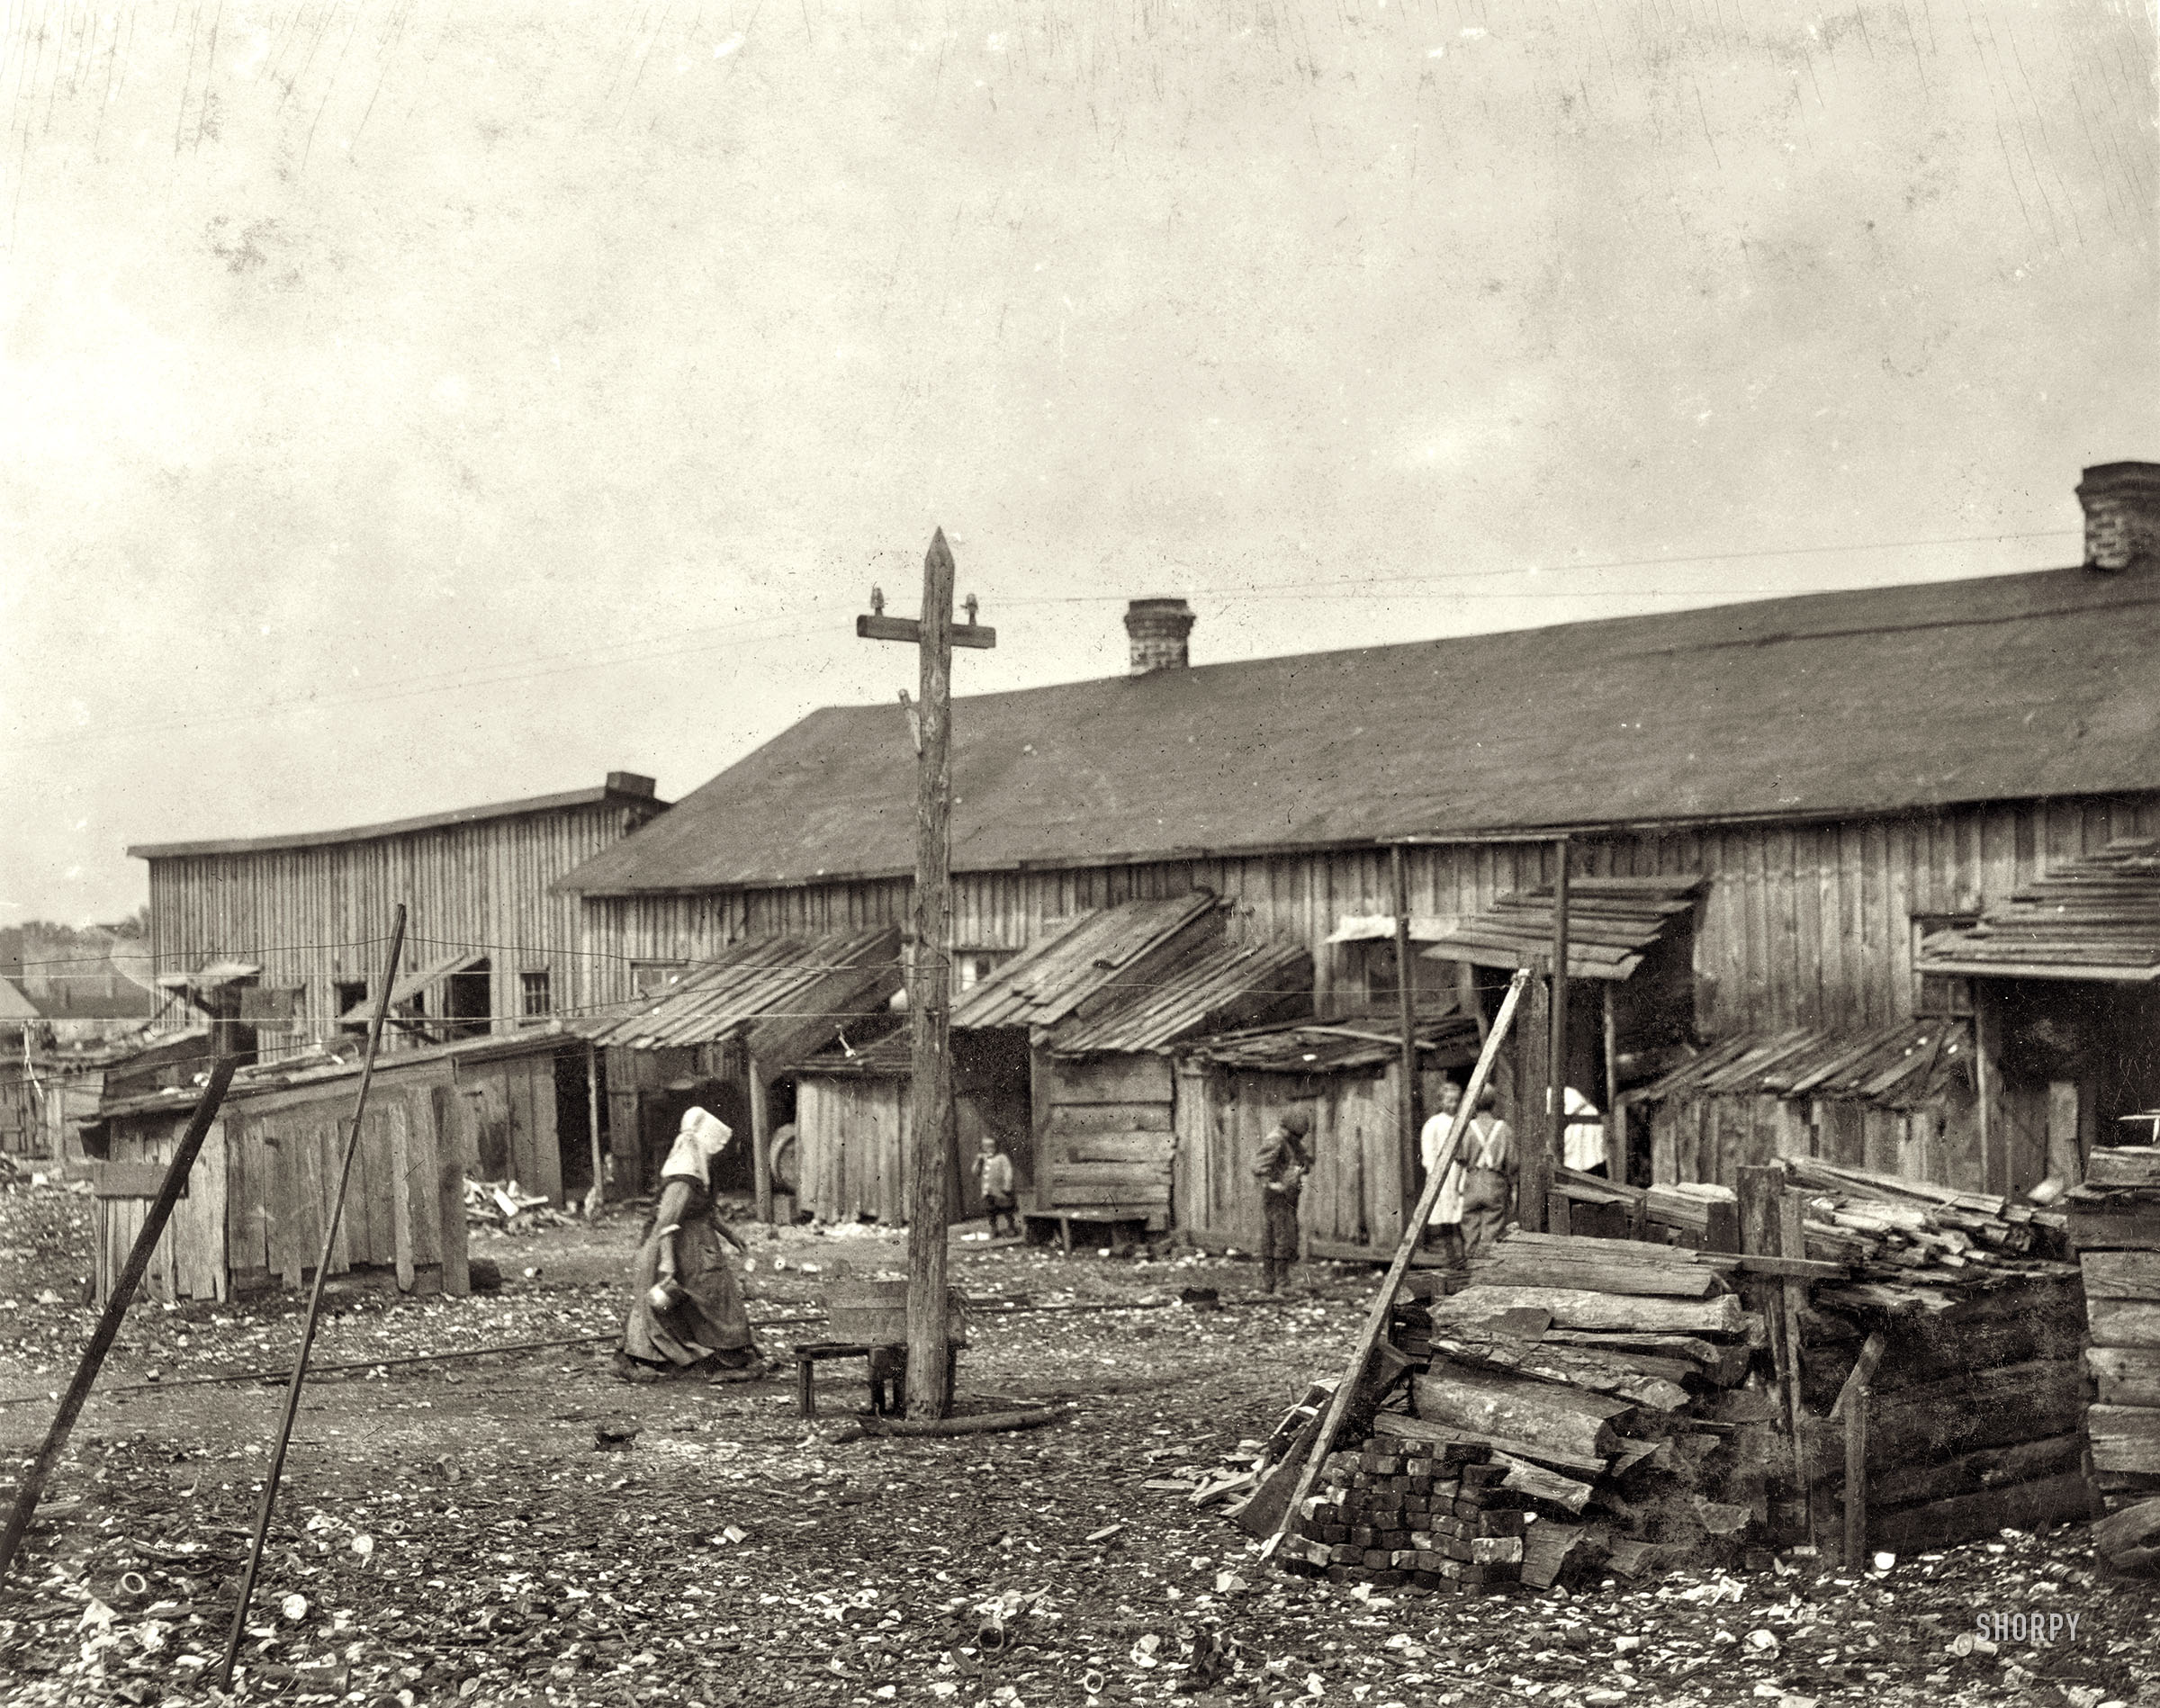 February 1912. Port Royal, South Carolina. "'We give them houses to live in.' About 50 persons housed in this miserable row of dilapidated shacks located on an old shell-pile and partly surrounded by a tidal marsh. Maggioni Canning Co." Photograph and caption by Lewis Wickes Hine. View full size.